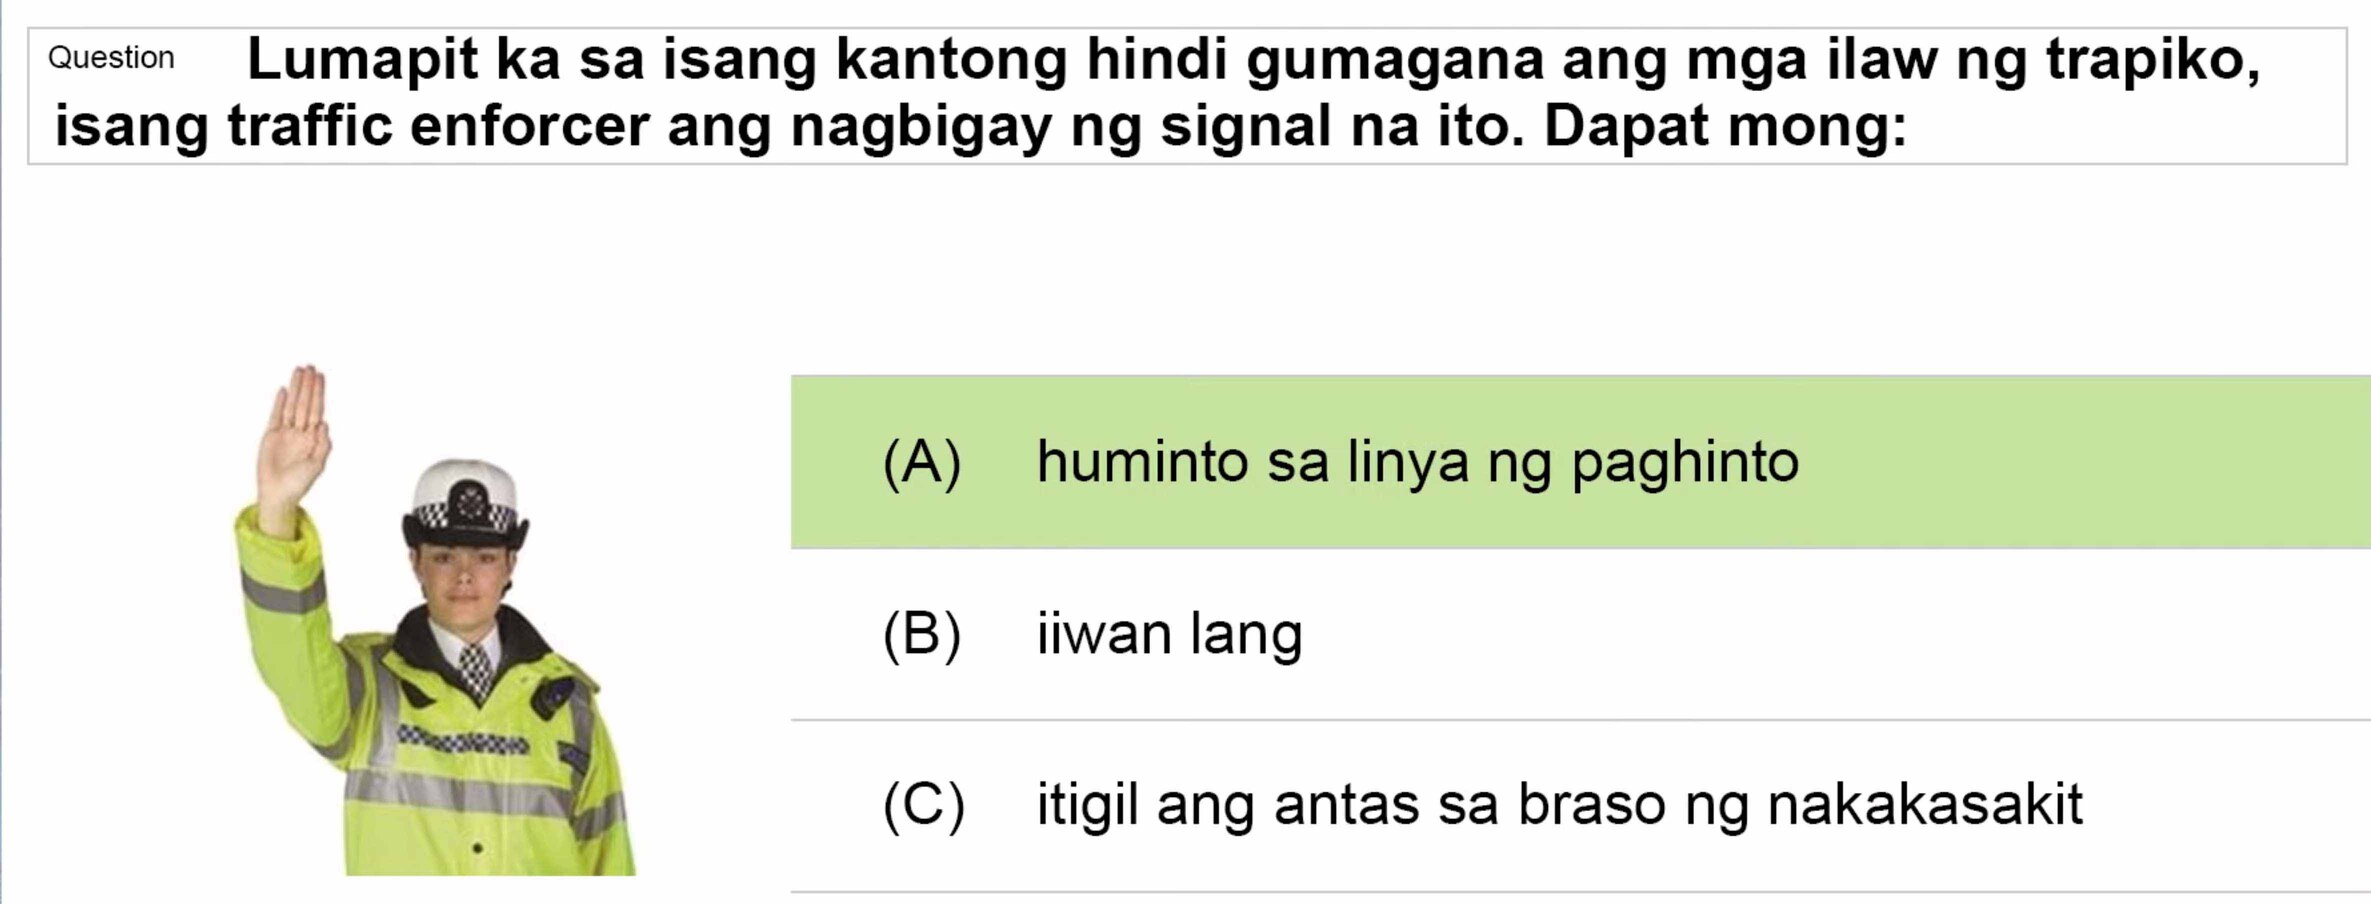 LTO Tagalog non professional exam reviewer light vehicle 3 (41)